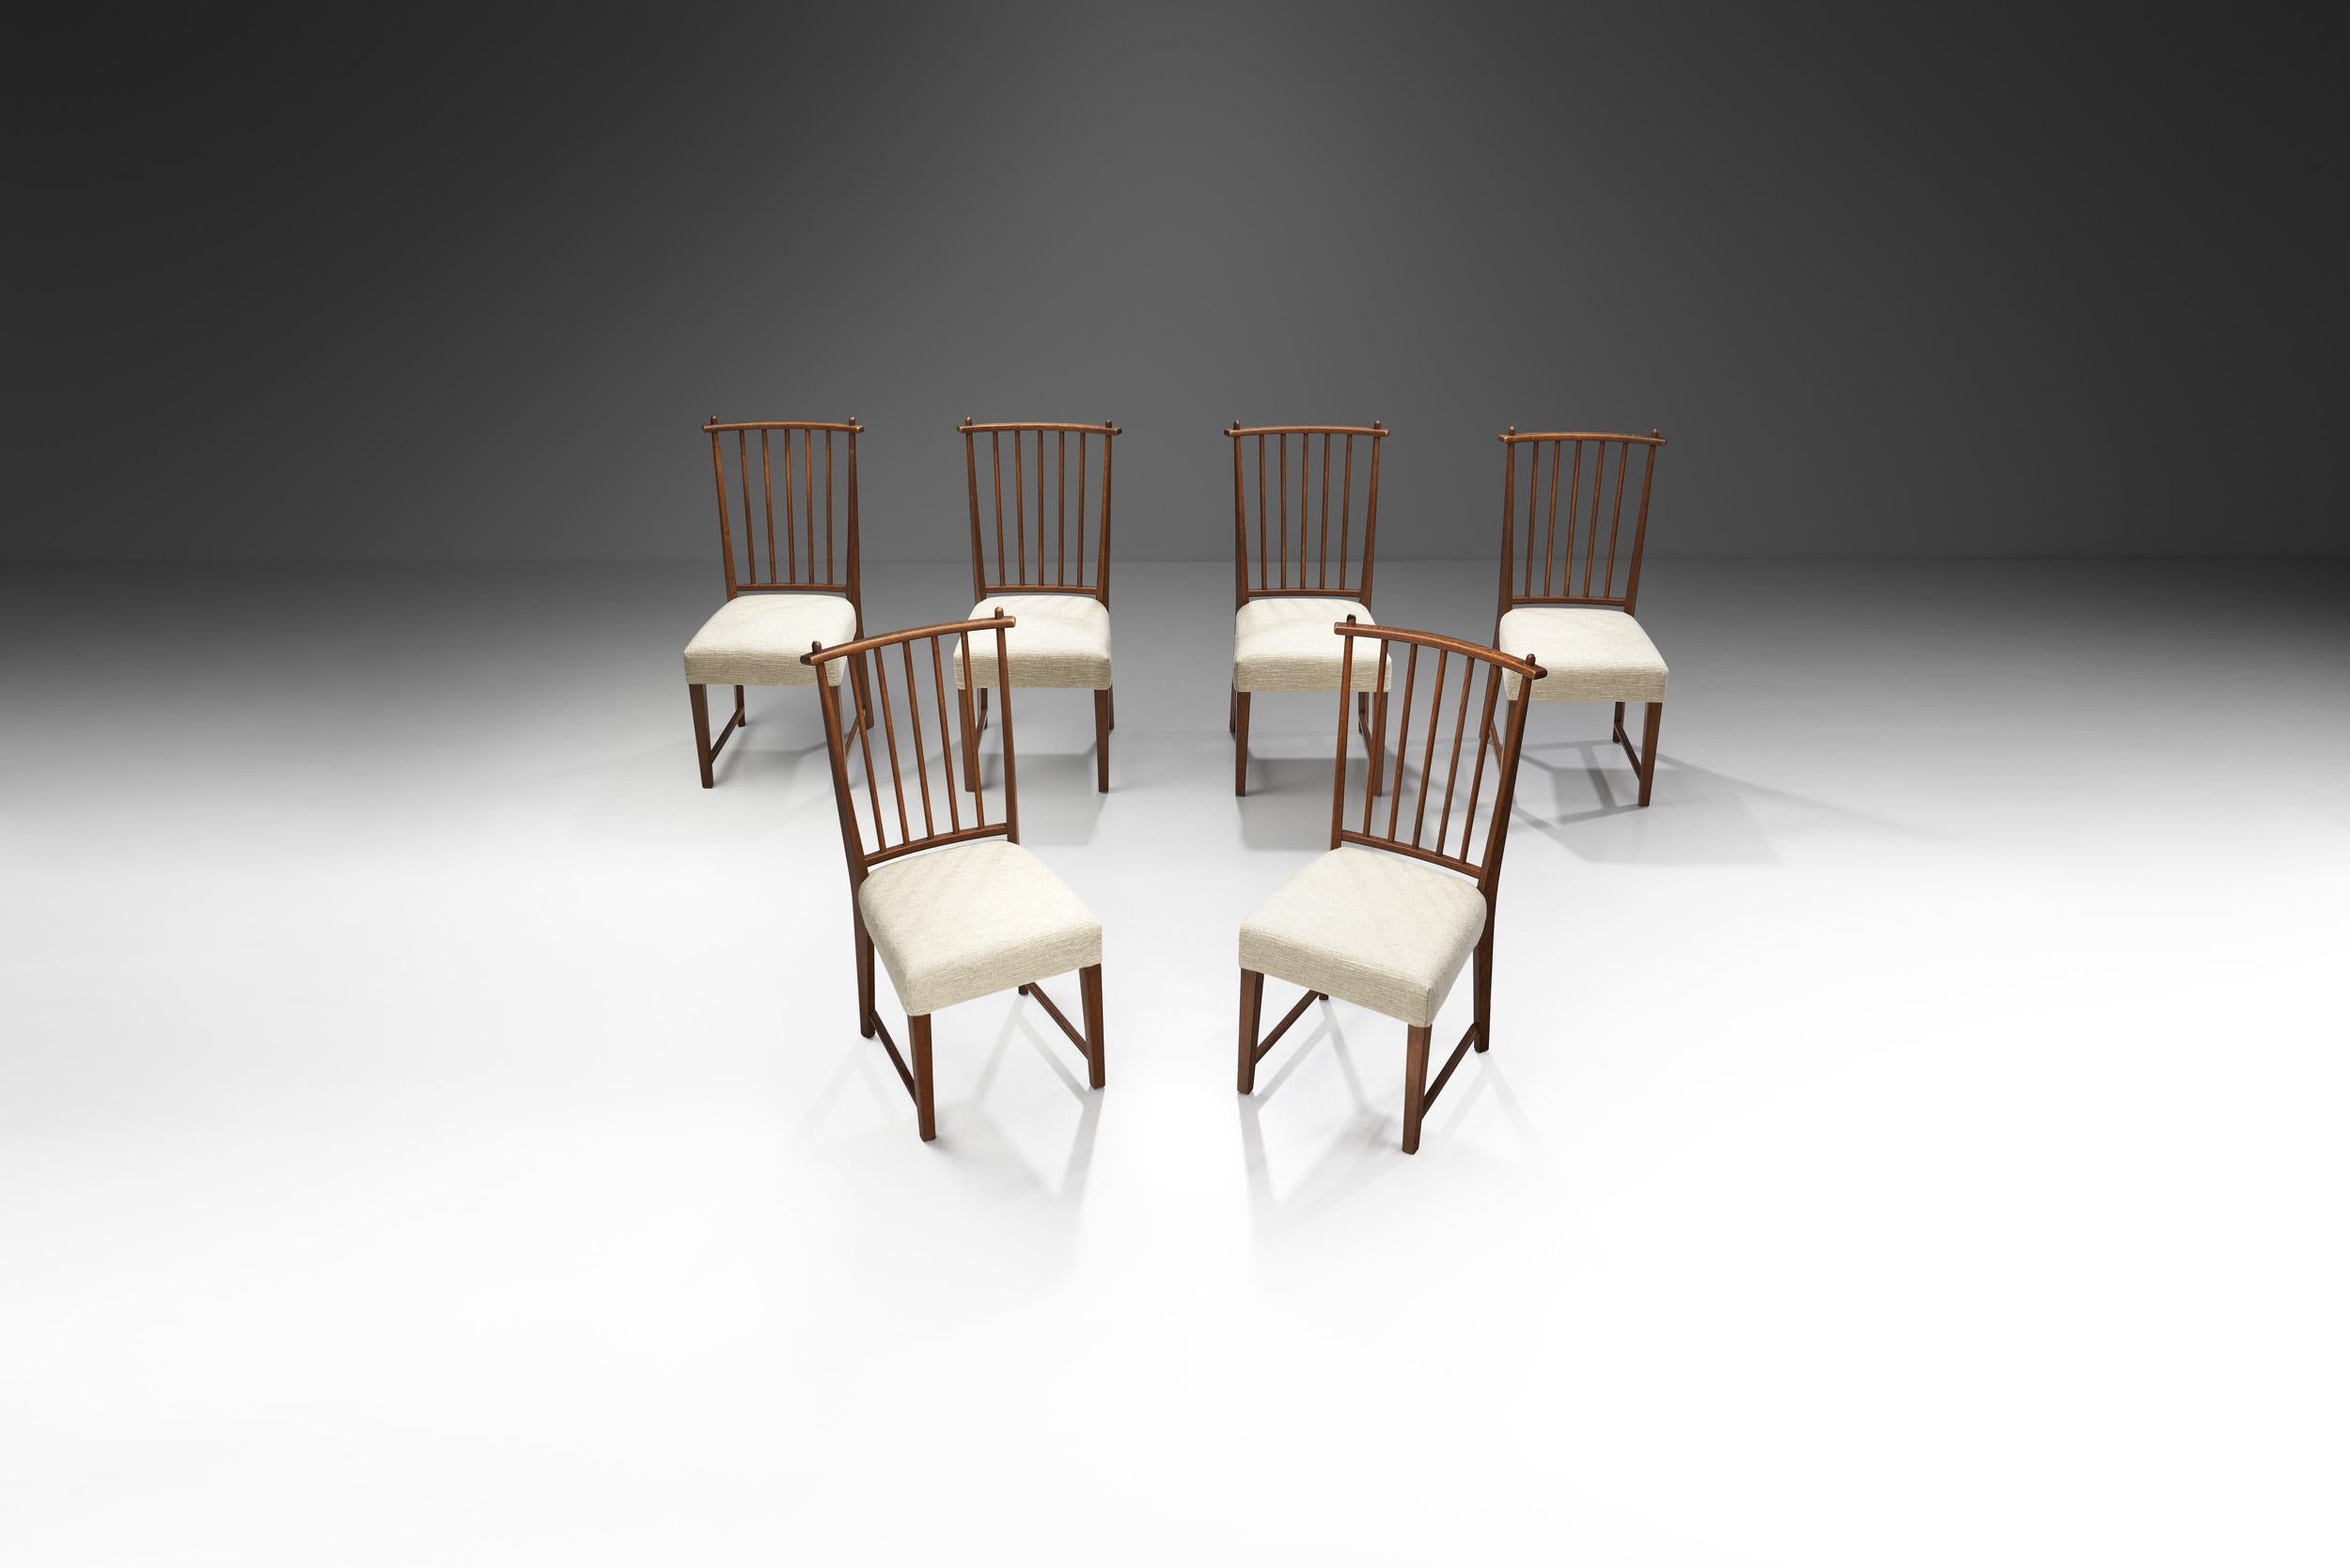 Other Bas van Pelt Set of Six Dining Chairs for My Home, The Netherlands, 1930s For Sale